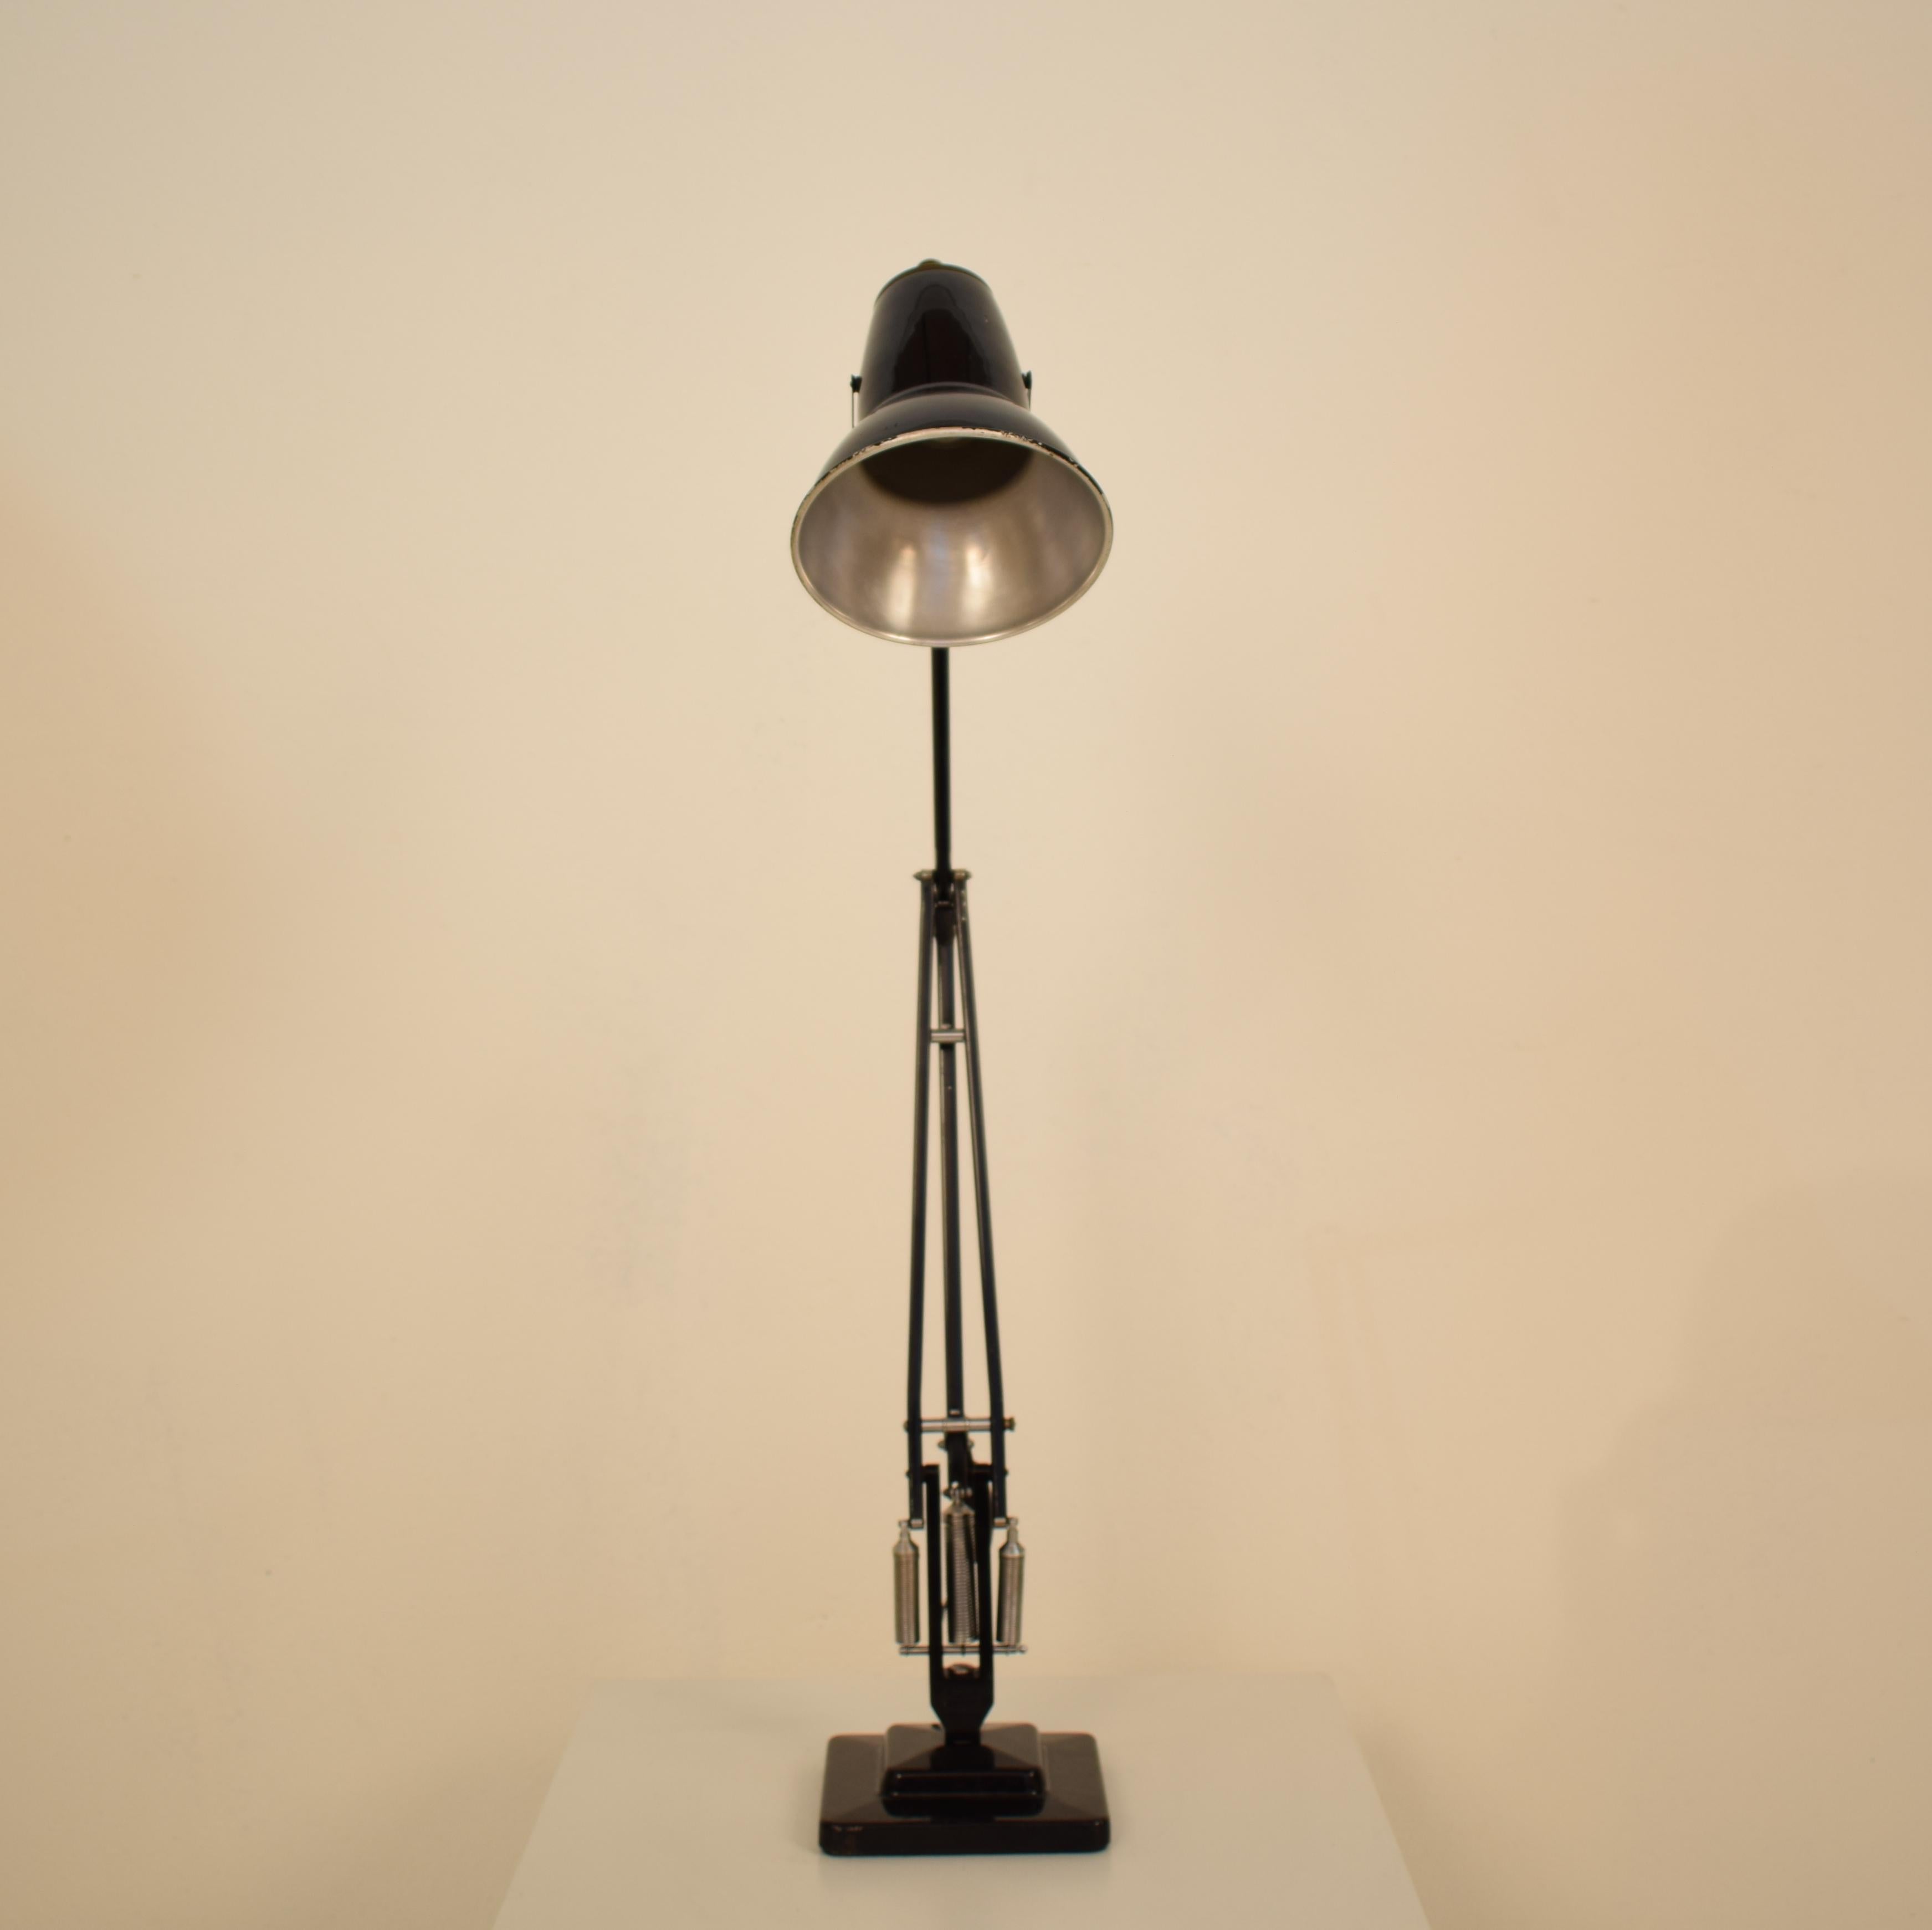 Lacquered Art Deco Anglepoise Desk Lamp for Herbert Terry & Sons by George Carwardine